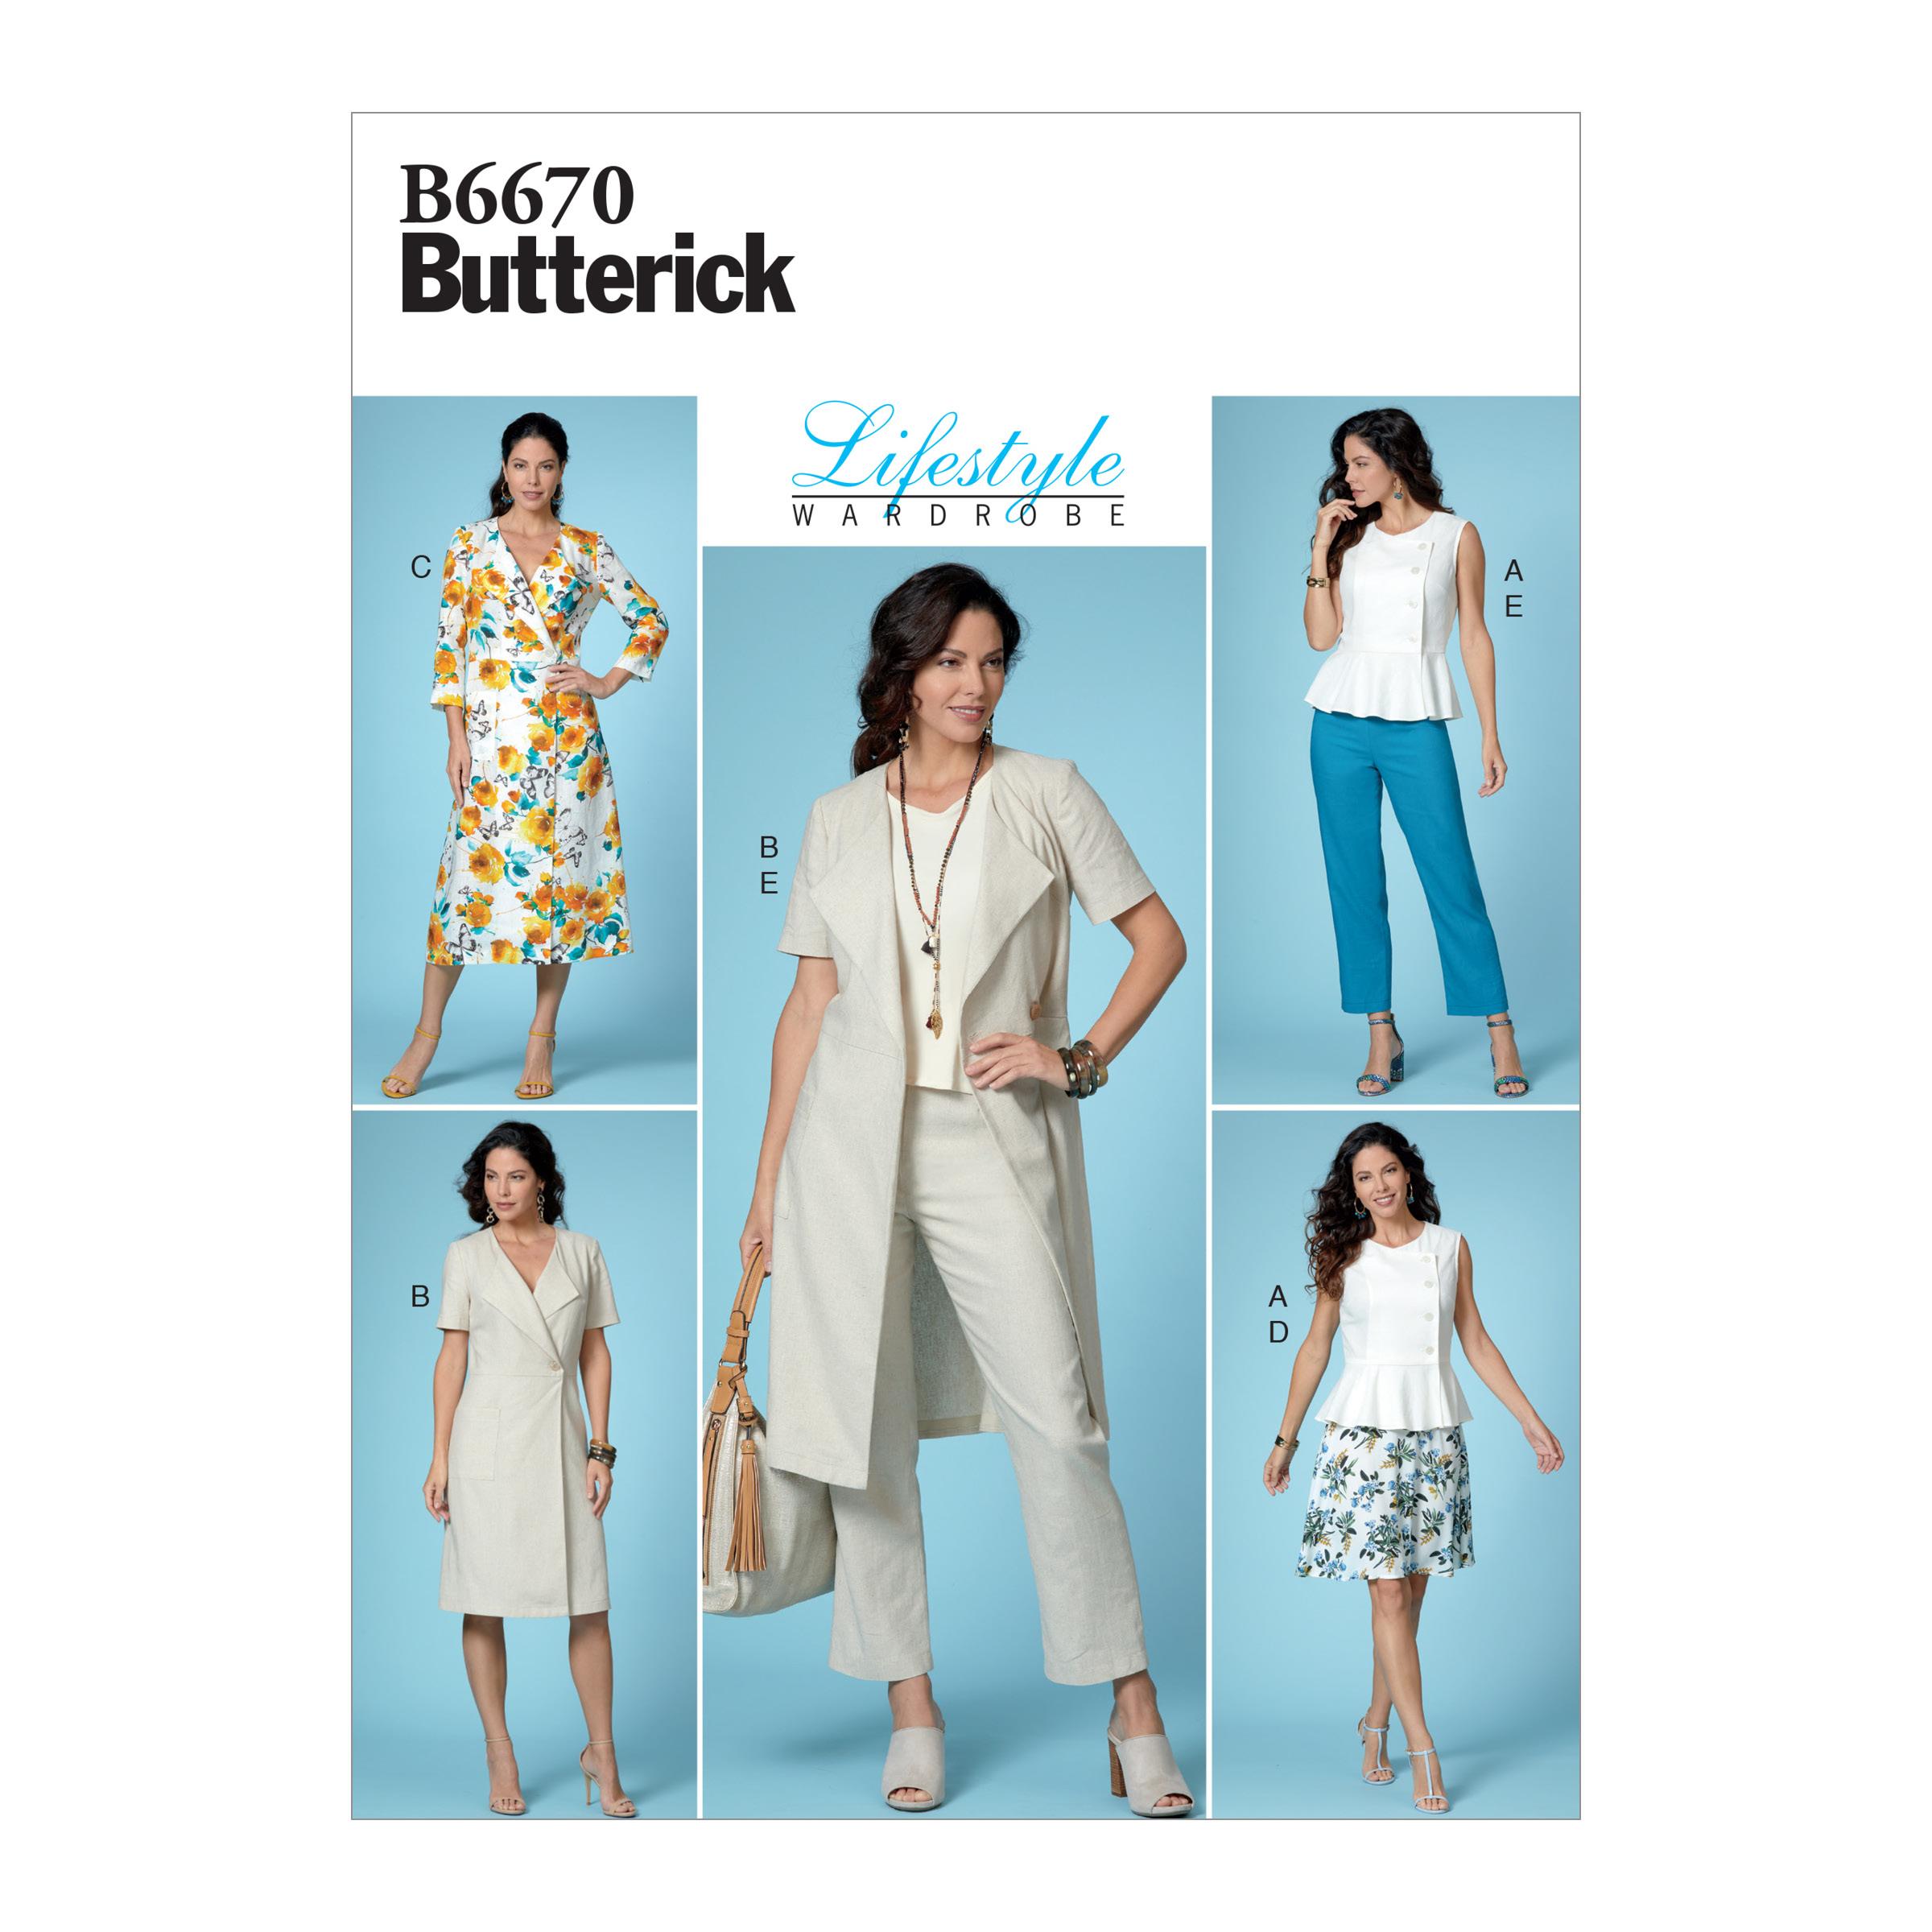 Butterick B6670 Misses' Top, Dress, Skirt and Pants